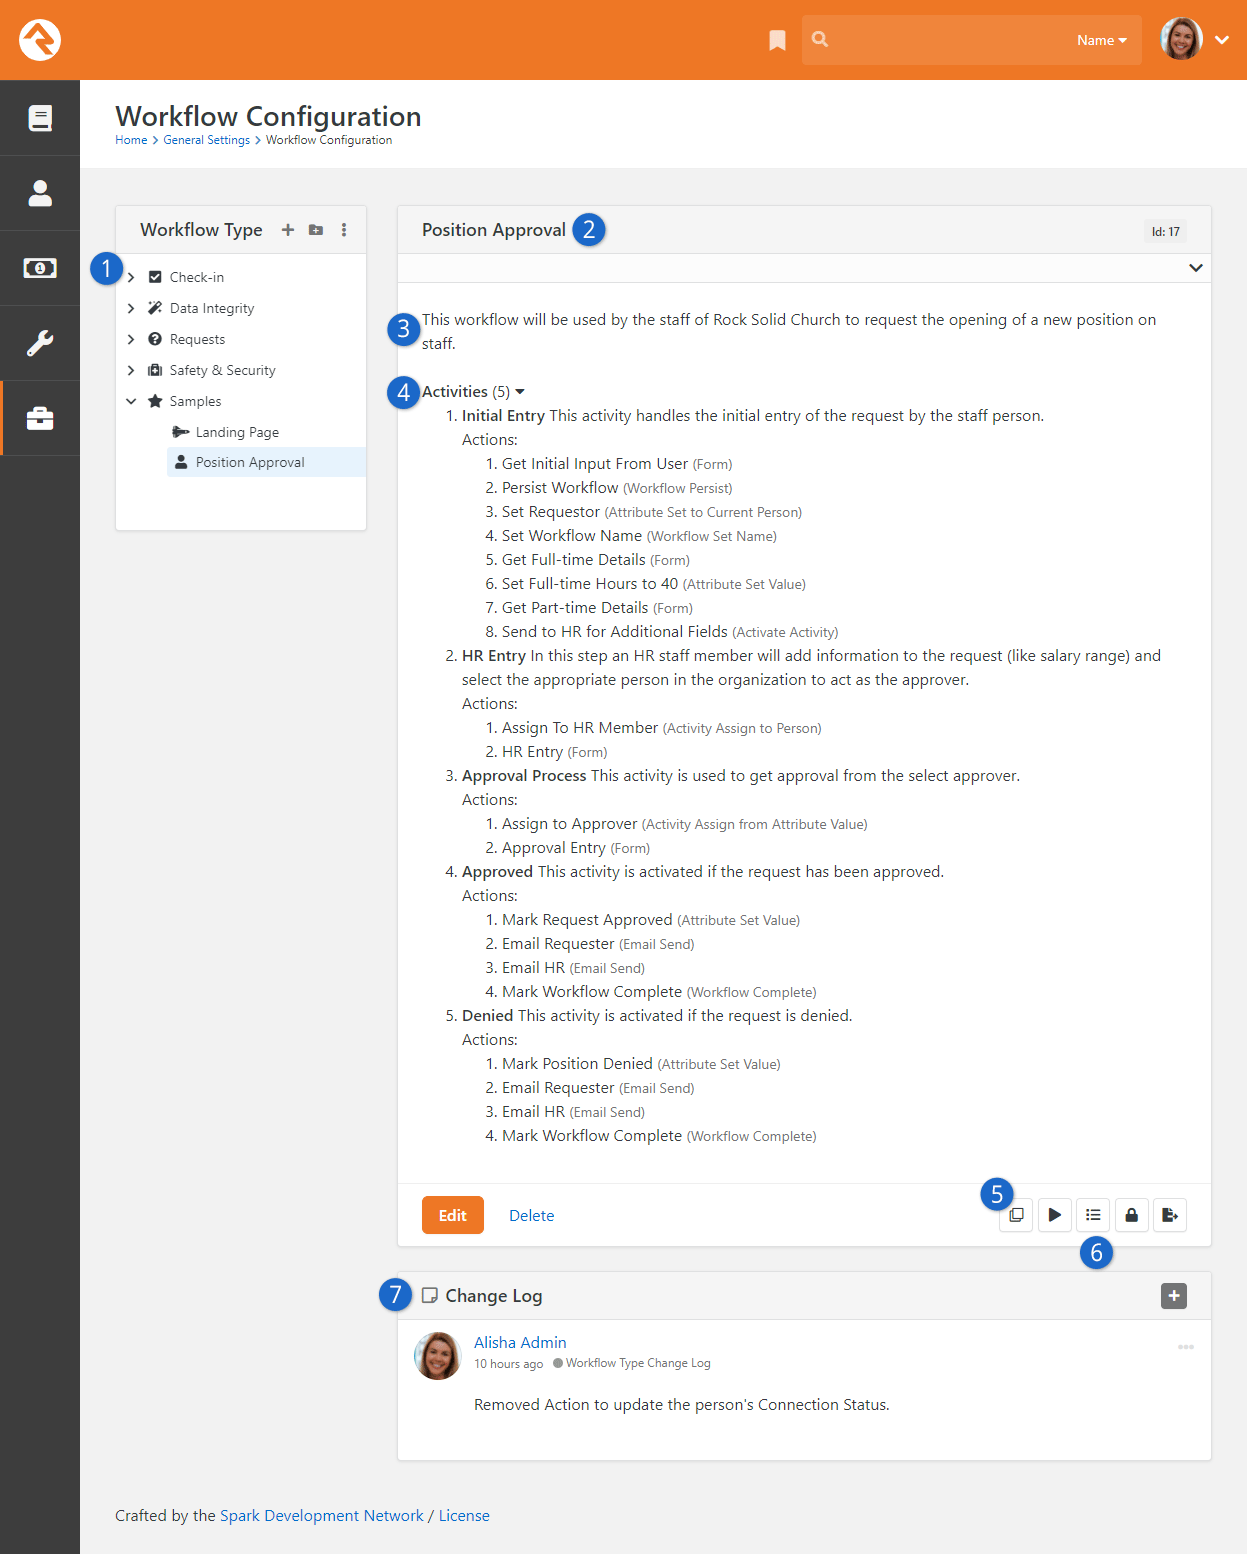 Workflow Type View